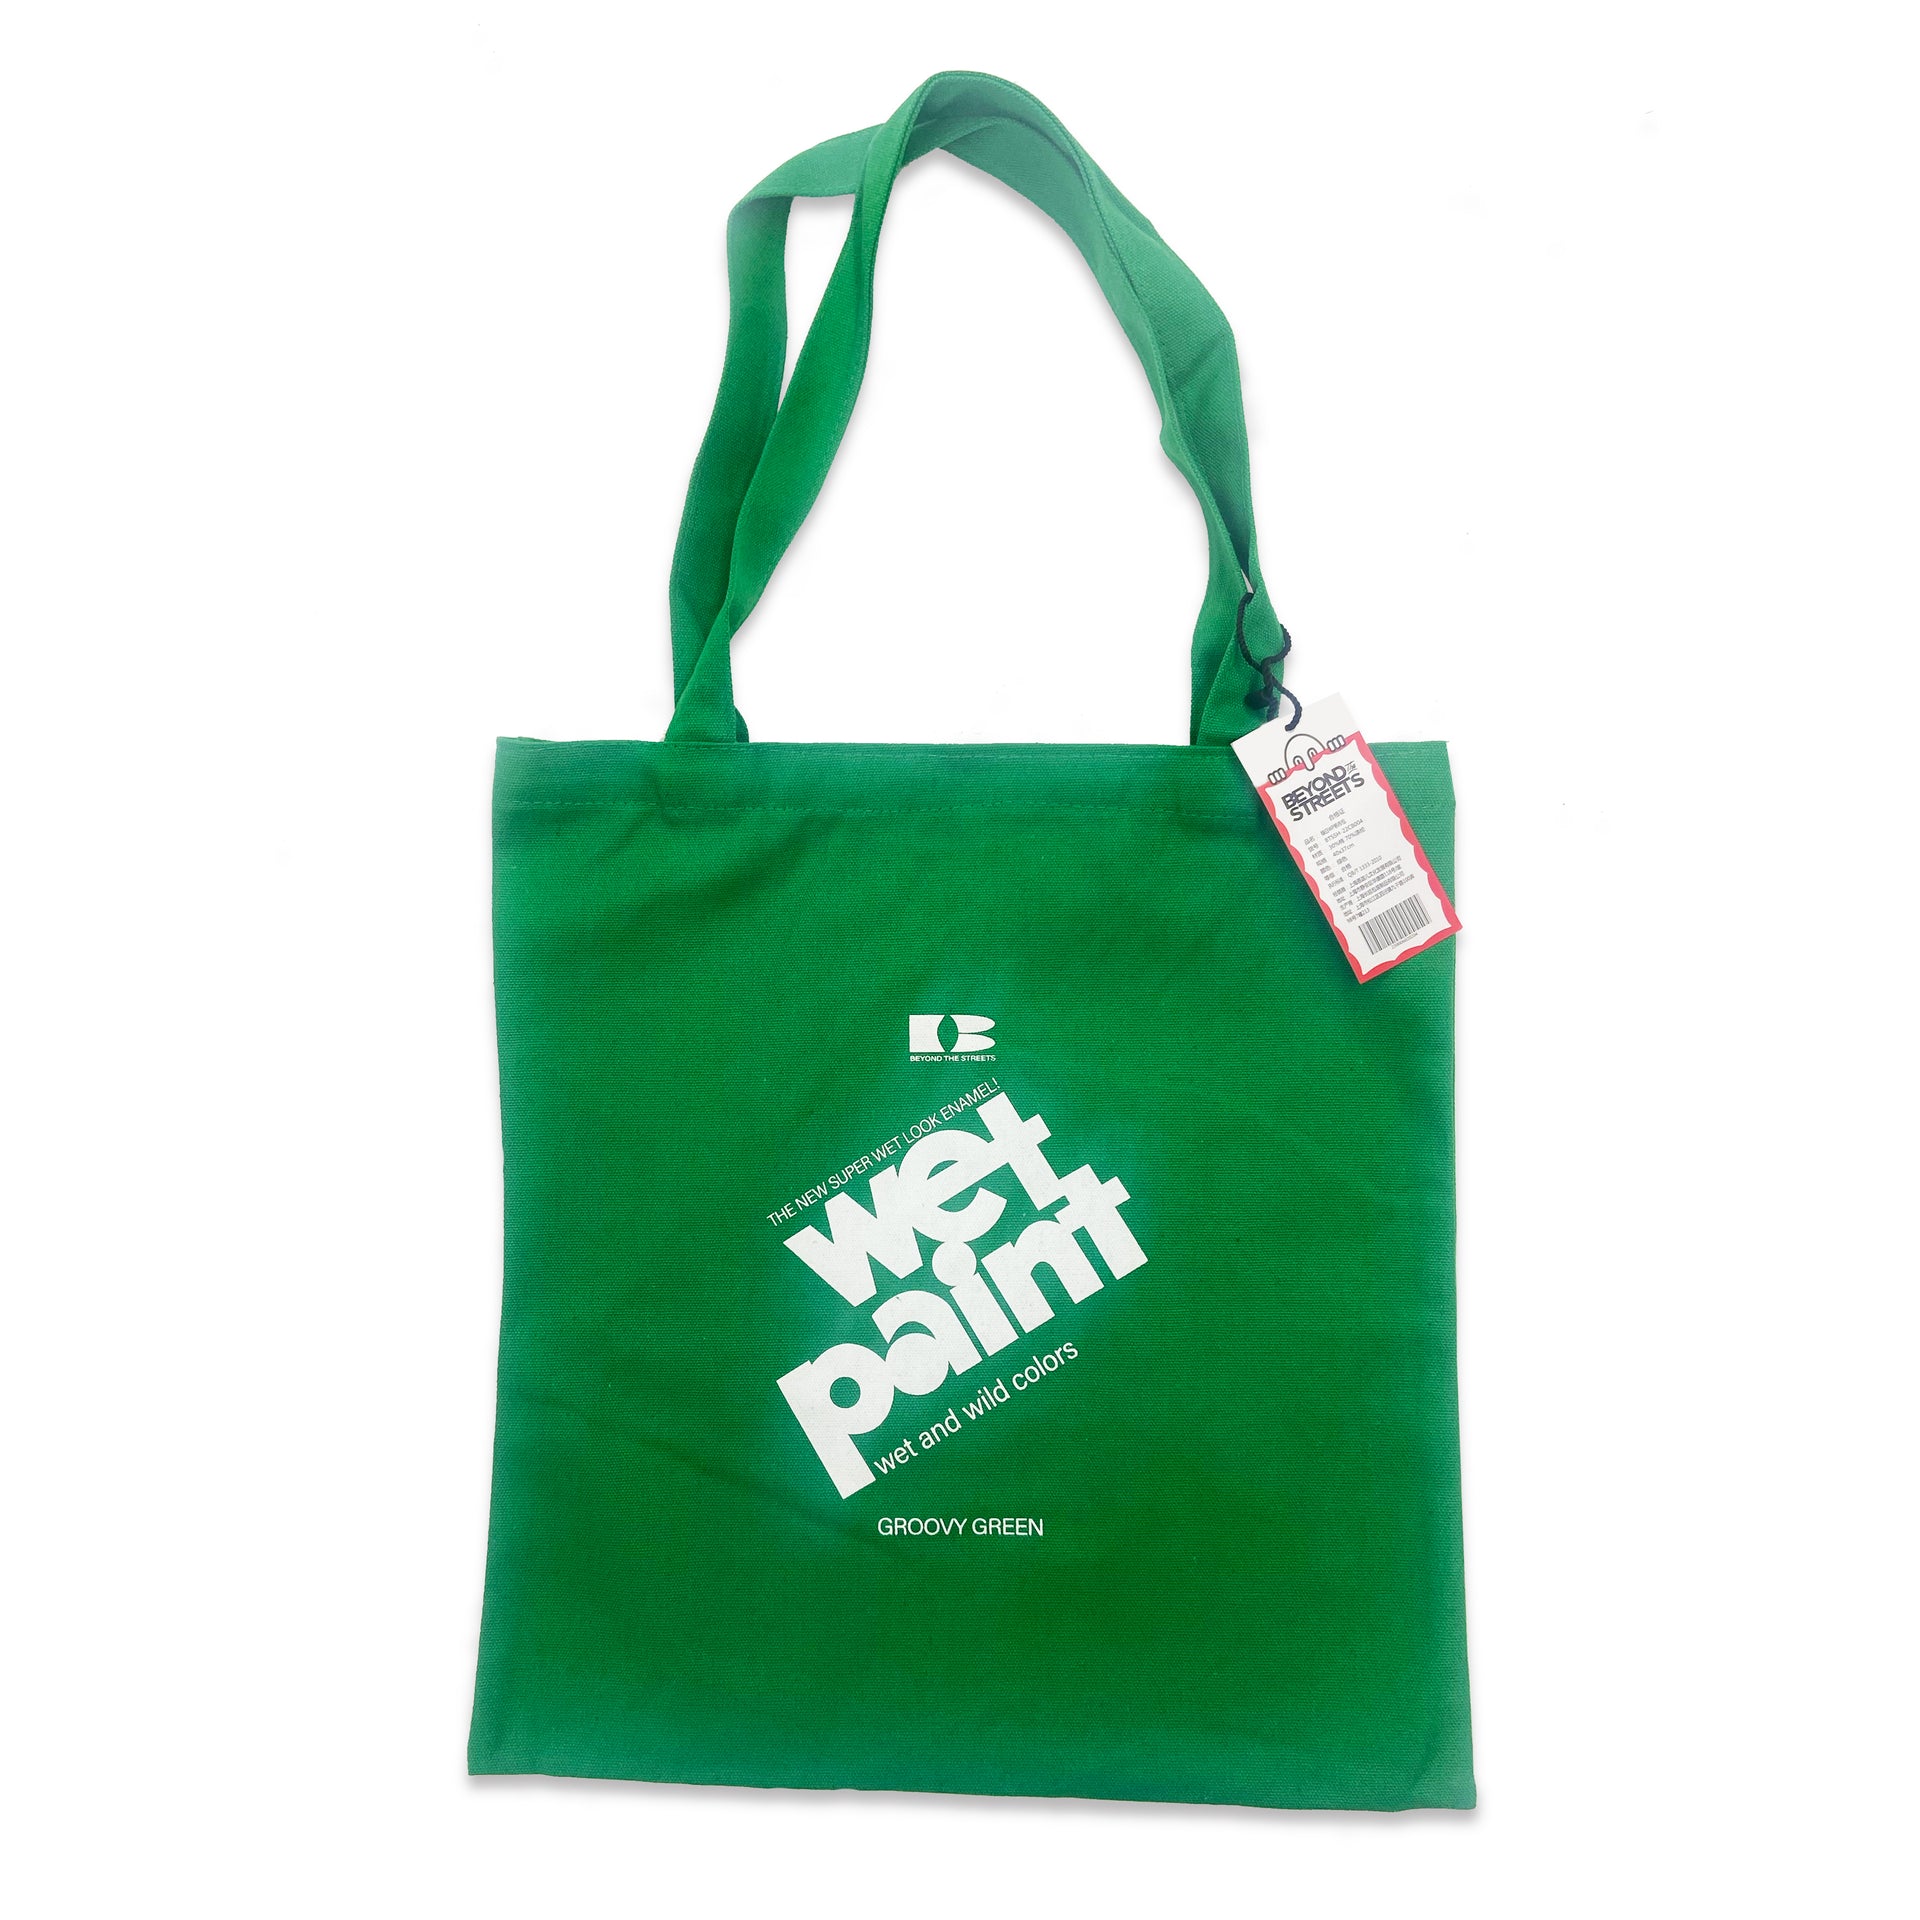 BEYOND THE STREETS "Wet Paint" Tote Bag